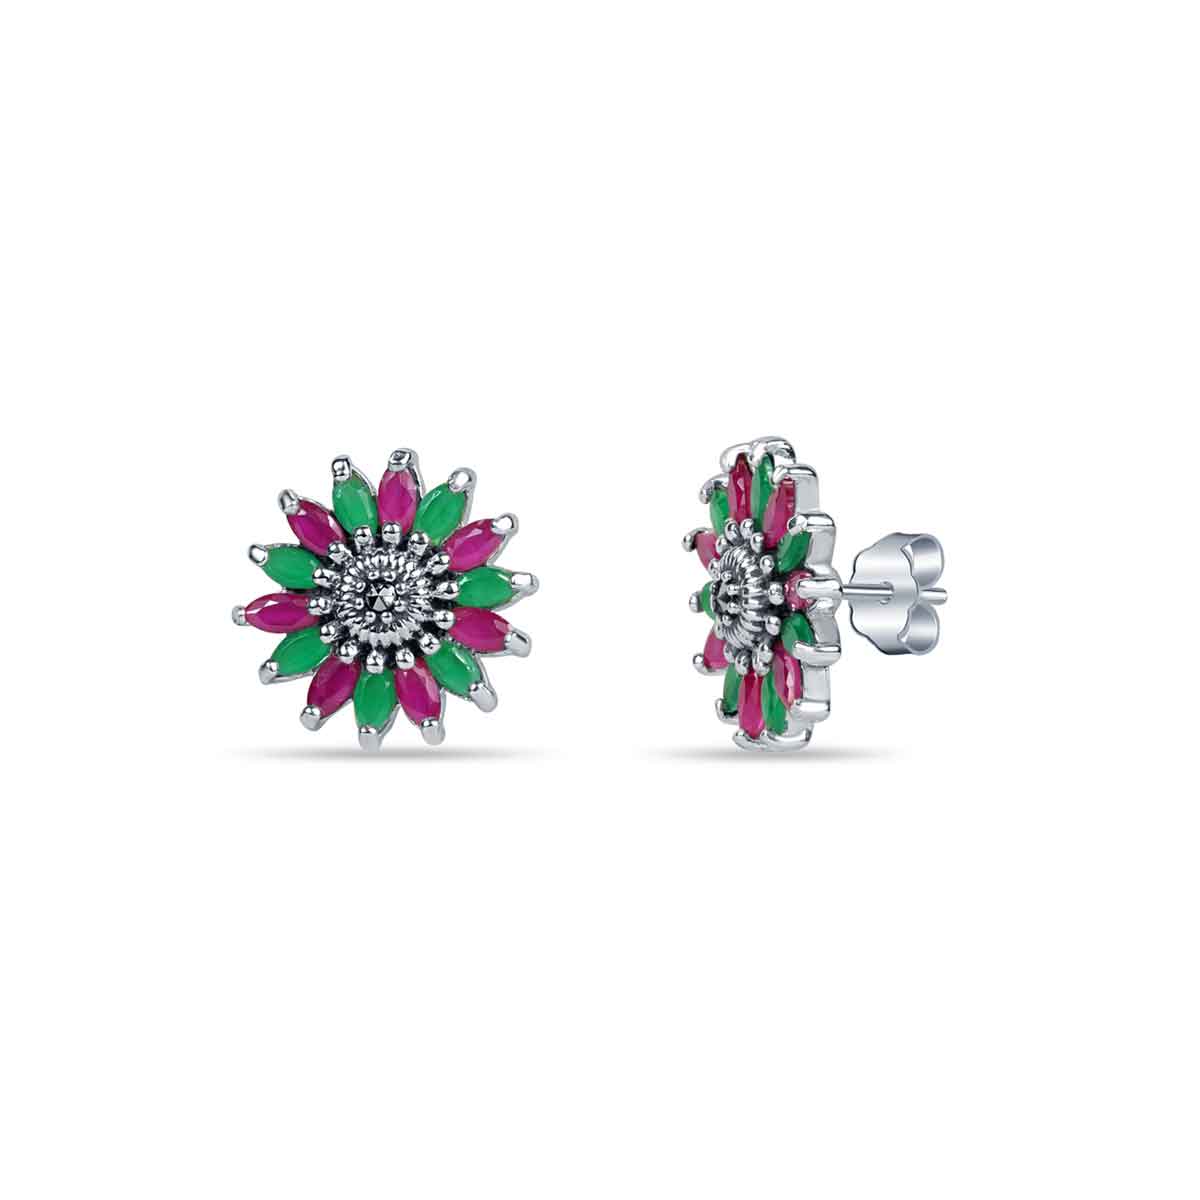 Enhance your style with these elegant Color Bloom 925 sterling silver studs. Intricately designed with ruby emerald and marcasite featuring a floral shape, these oxidized earrings are perfect for everyday wear. Sterling silver ensures durability and adds a touch of sophistication to your look.